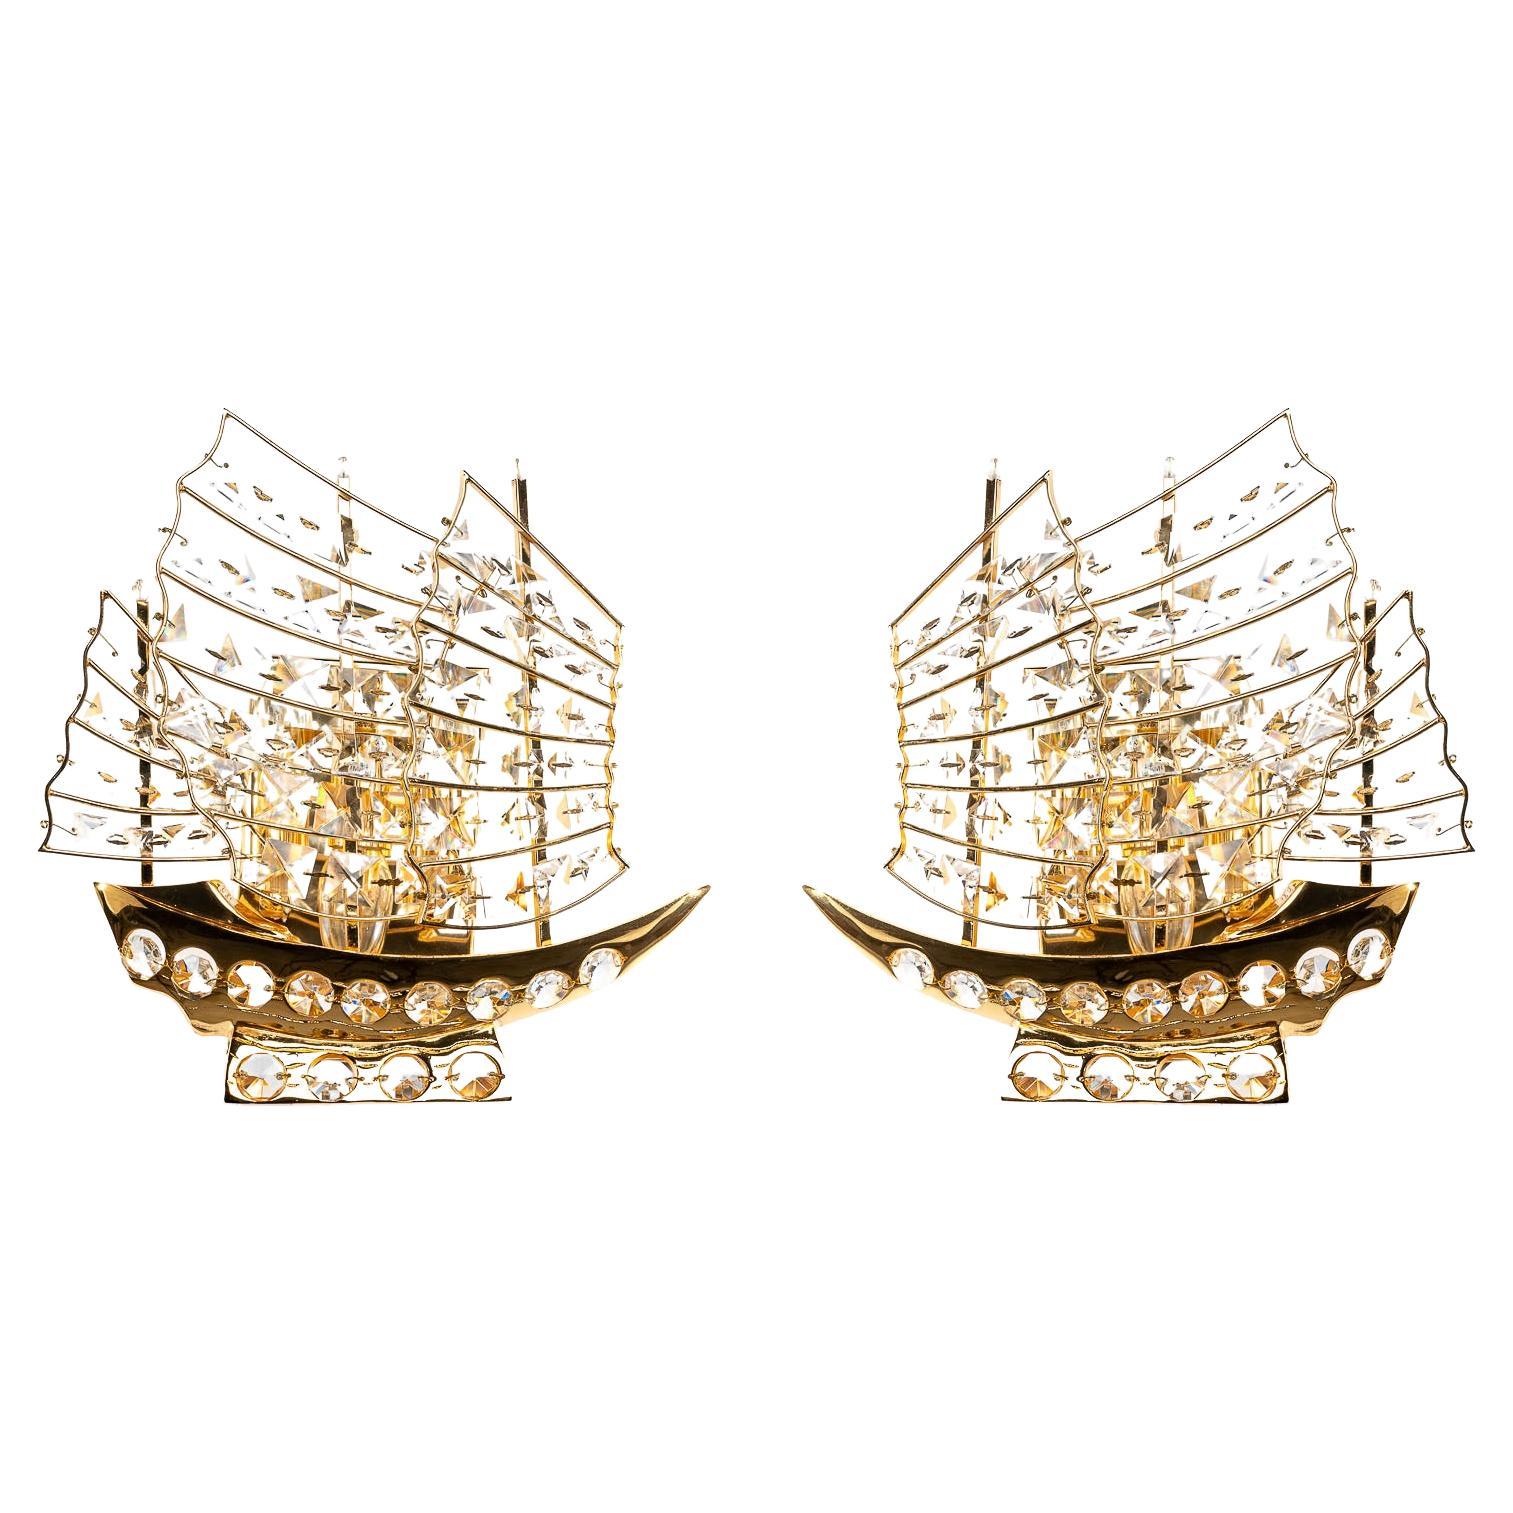 Modern Glass & Metal Chinese Junk Ship Sconces For Sale